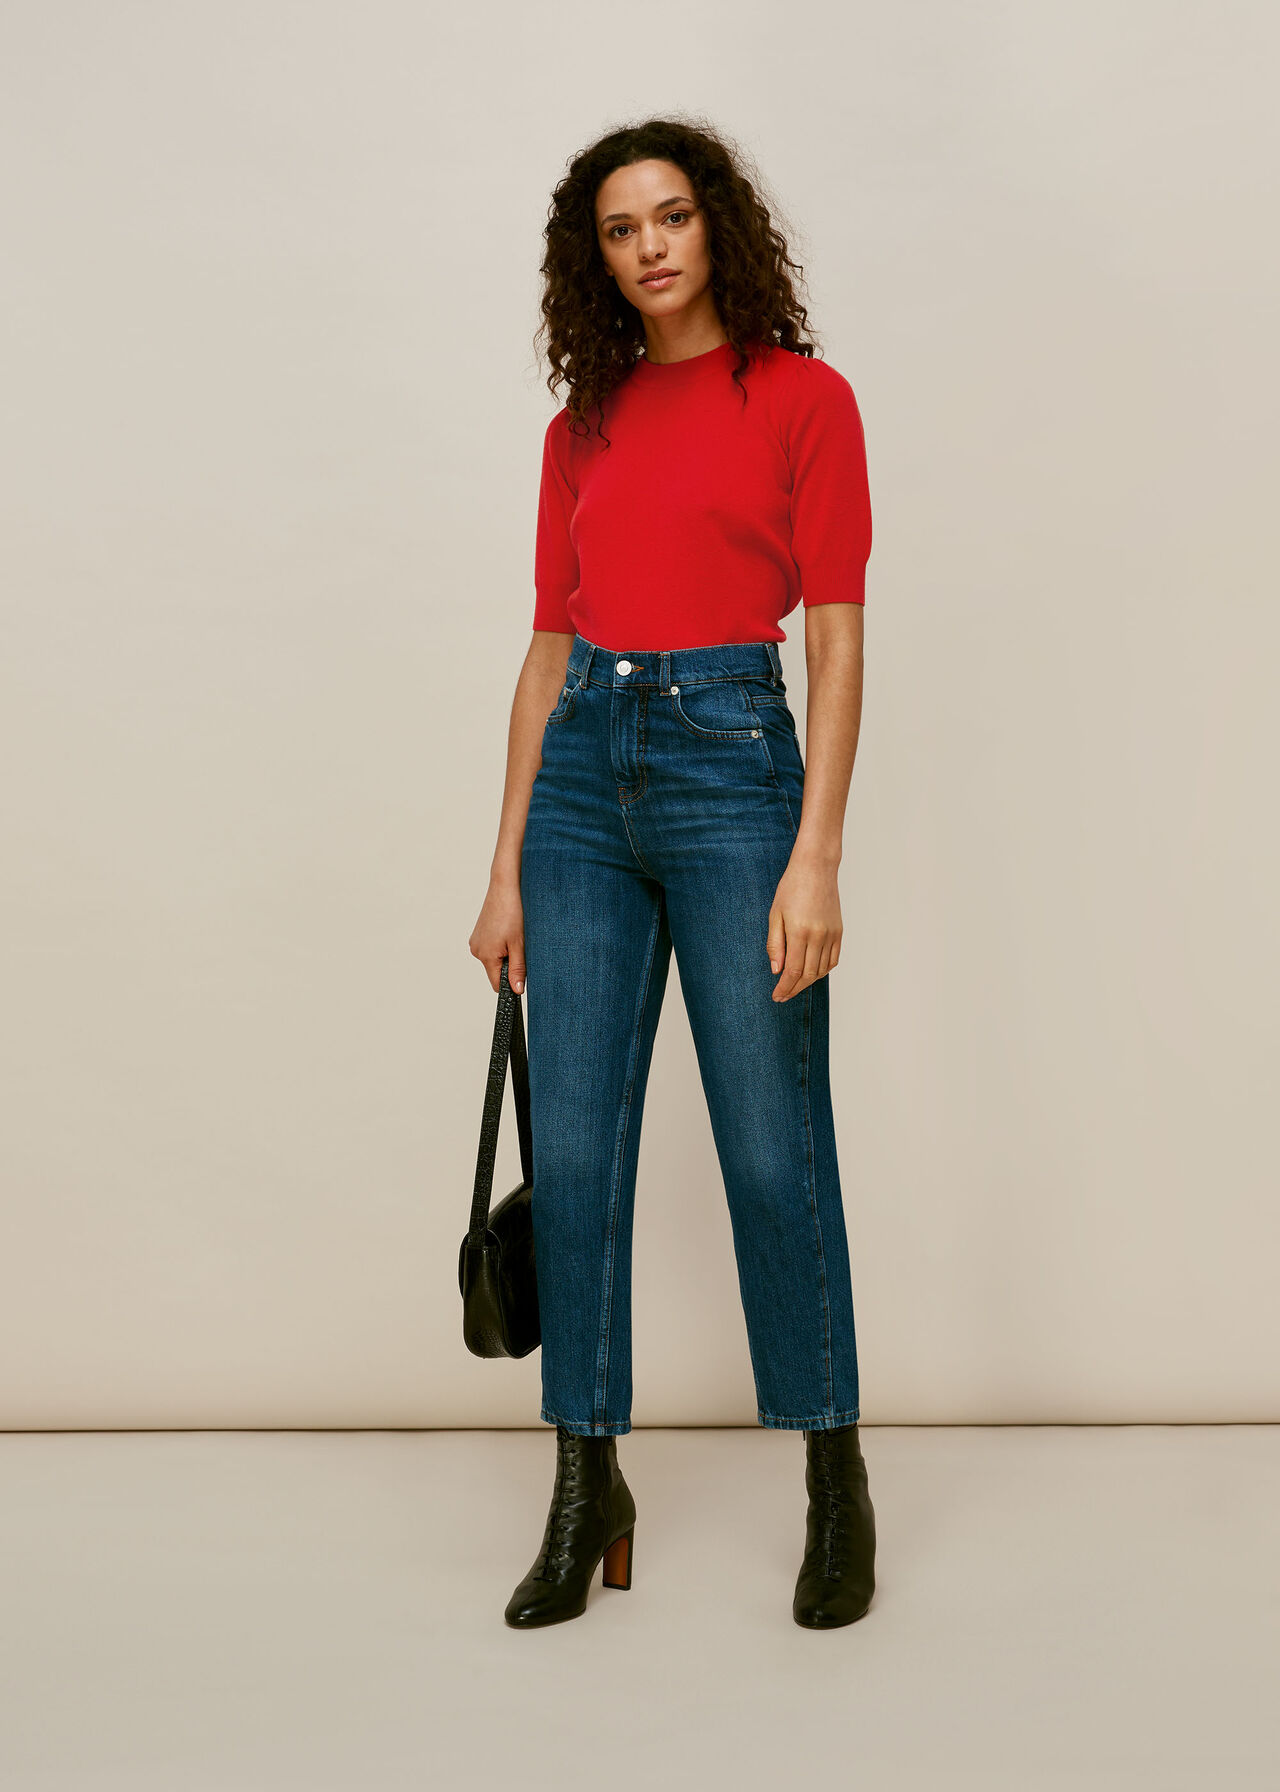 Puff Short Sleeve Knit Red